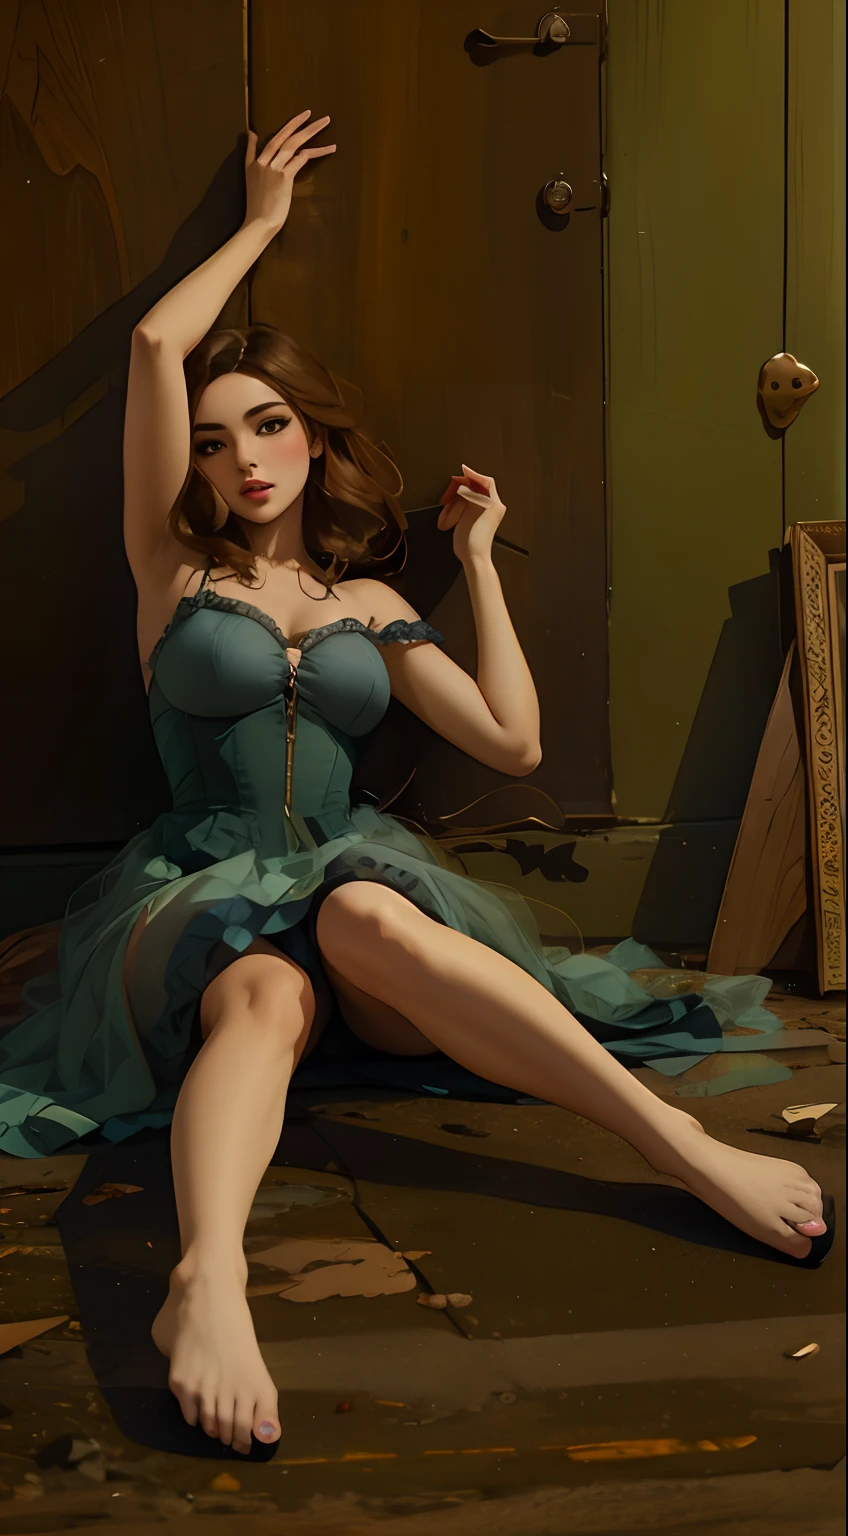 Woman in a blue dress sitting on the floor, Artgerm Style, In the Artgerm style, Artgerm and WLOP, Artgerm Style, ivan talavera and artgerm style, Beautiful and seductive anime woman, Artgerm&#39;s style, Artgerm style, loish and wlop, blue corset